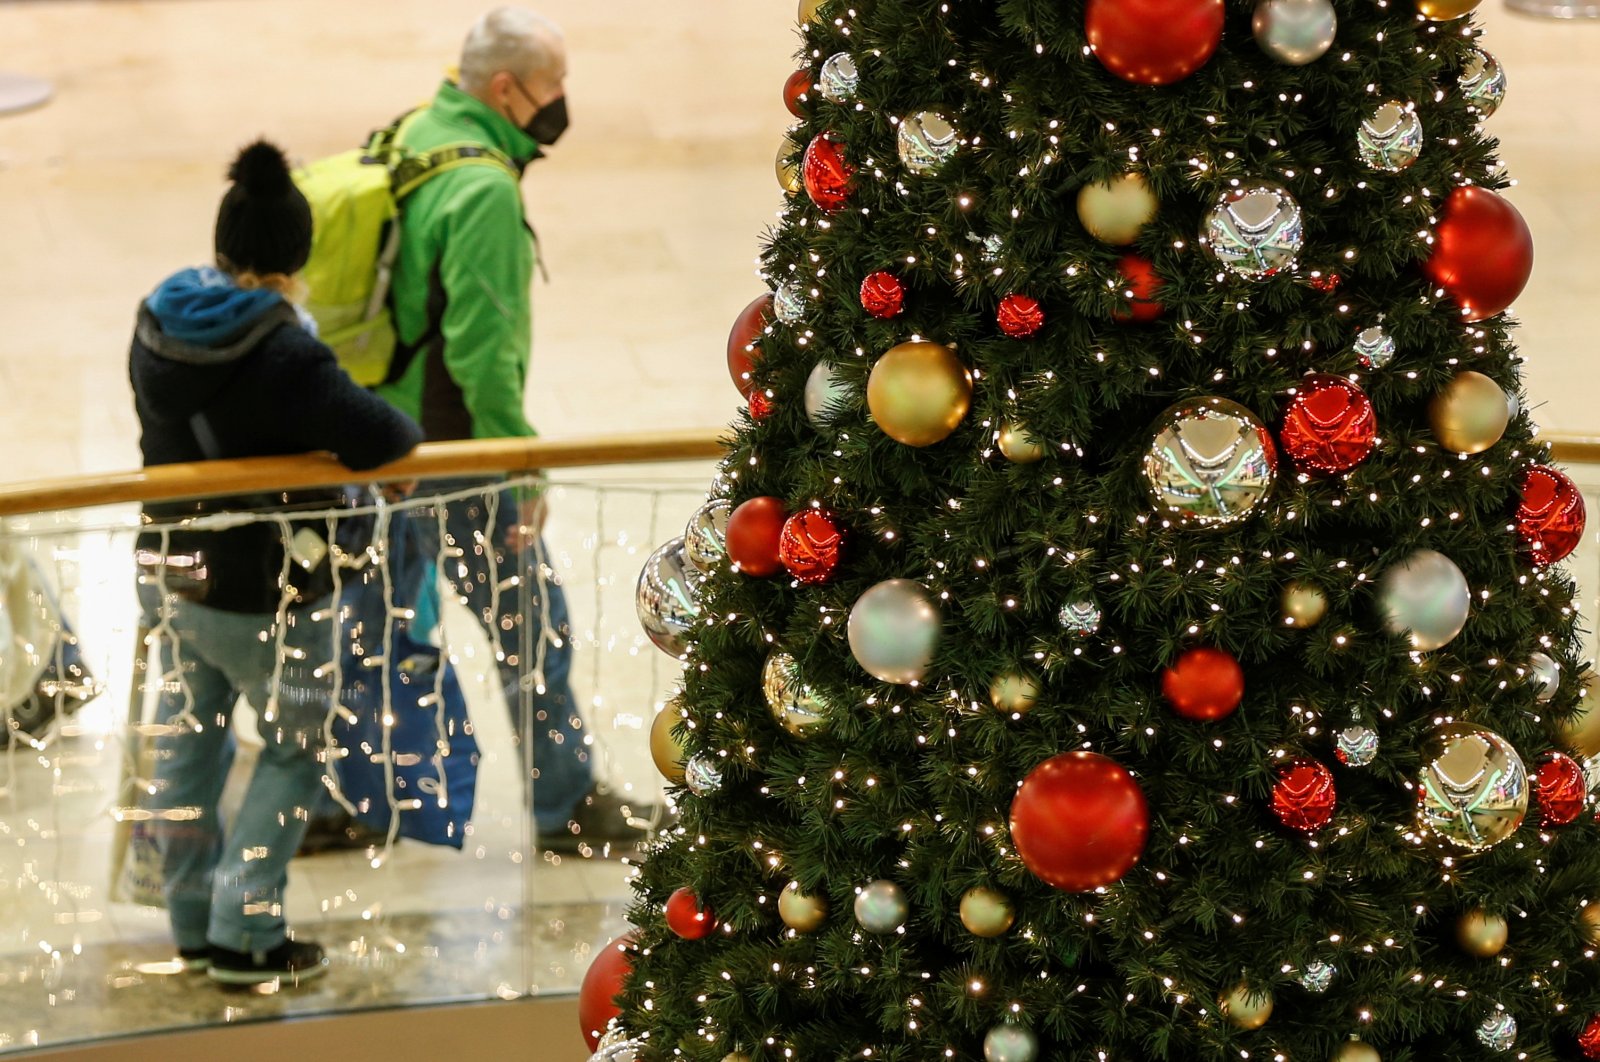 People move past a Christmas tree in a shopping center as a fourth wave of the coronavirus pandemic hits, Munich, Germany, Nov. 27, 2021. (Reuters Photo)